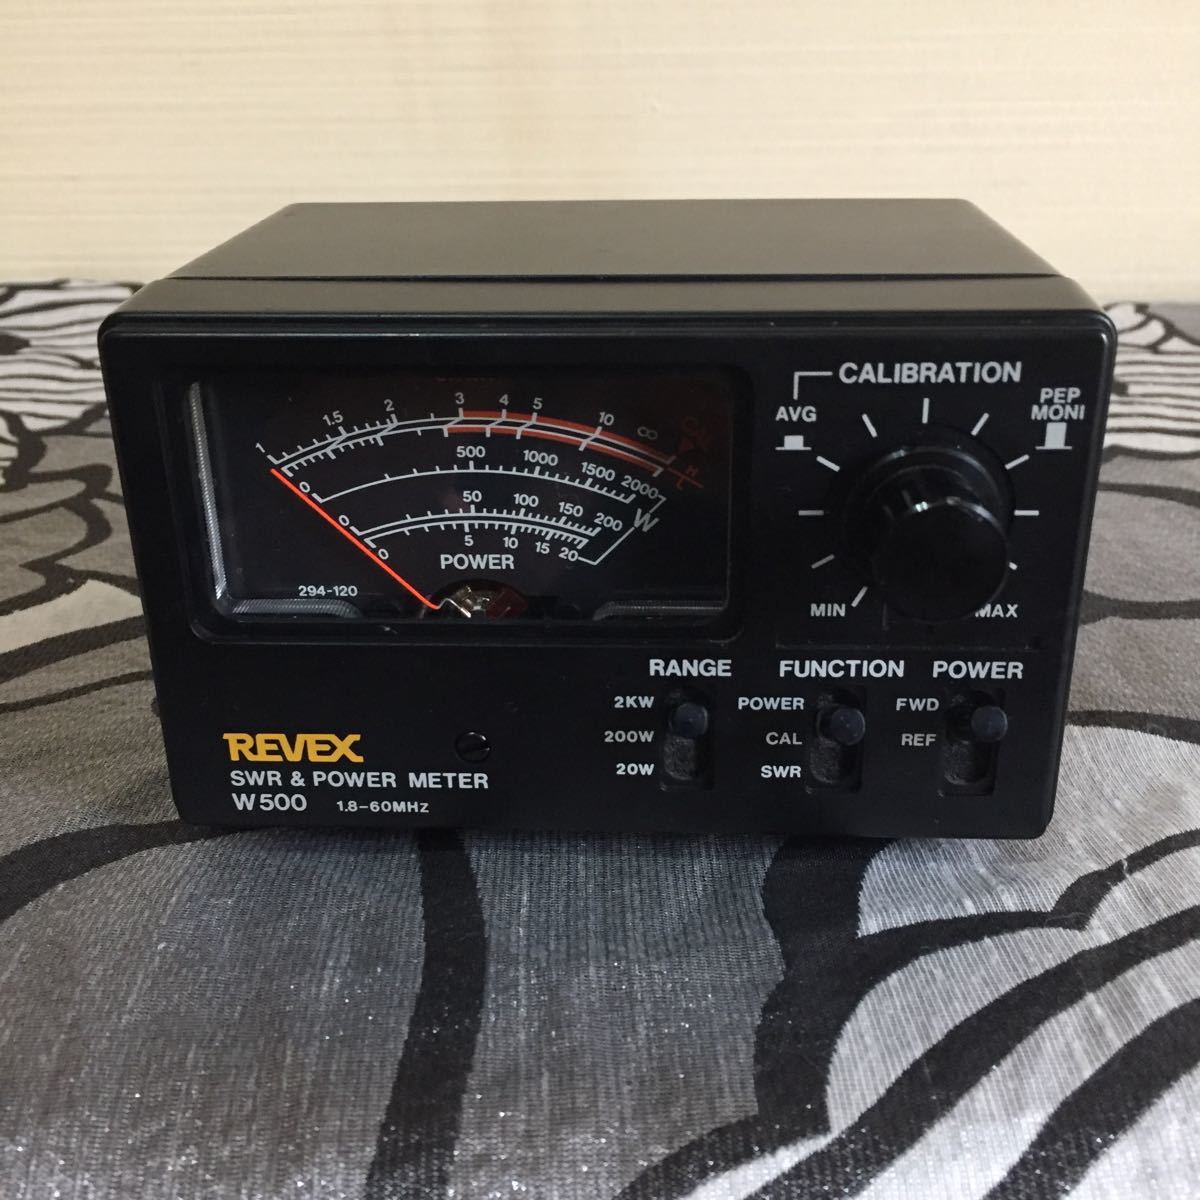  transceiver for SWR&POWER METER REVEX W500 1.8~60MHz beautiful goods maintenance inspection completed . operation verification ending 20w*200w*2Kw 3 range switch 